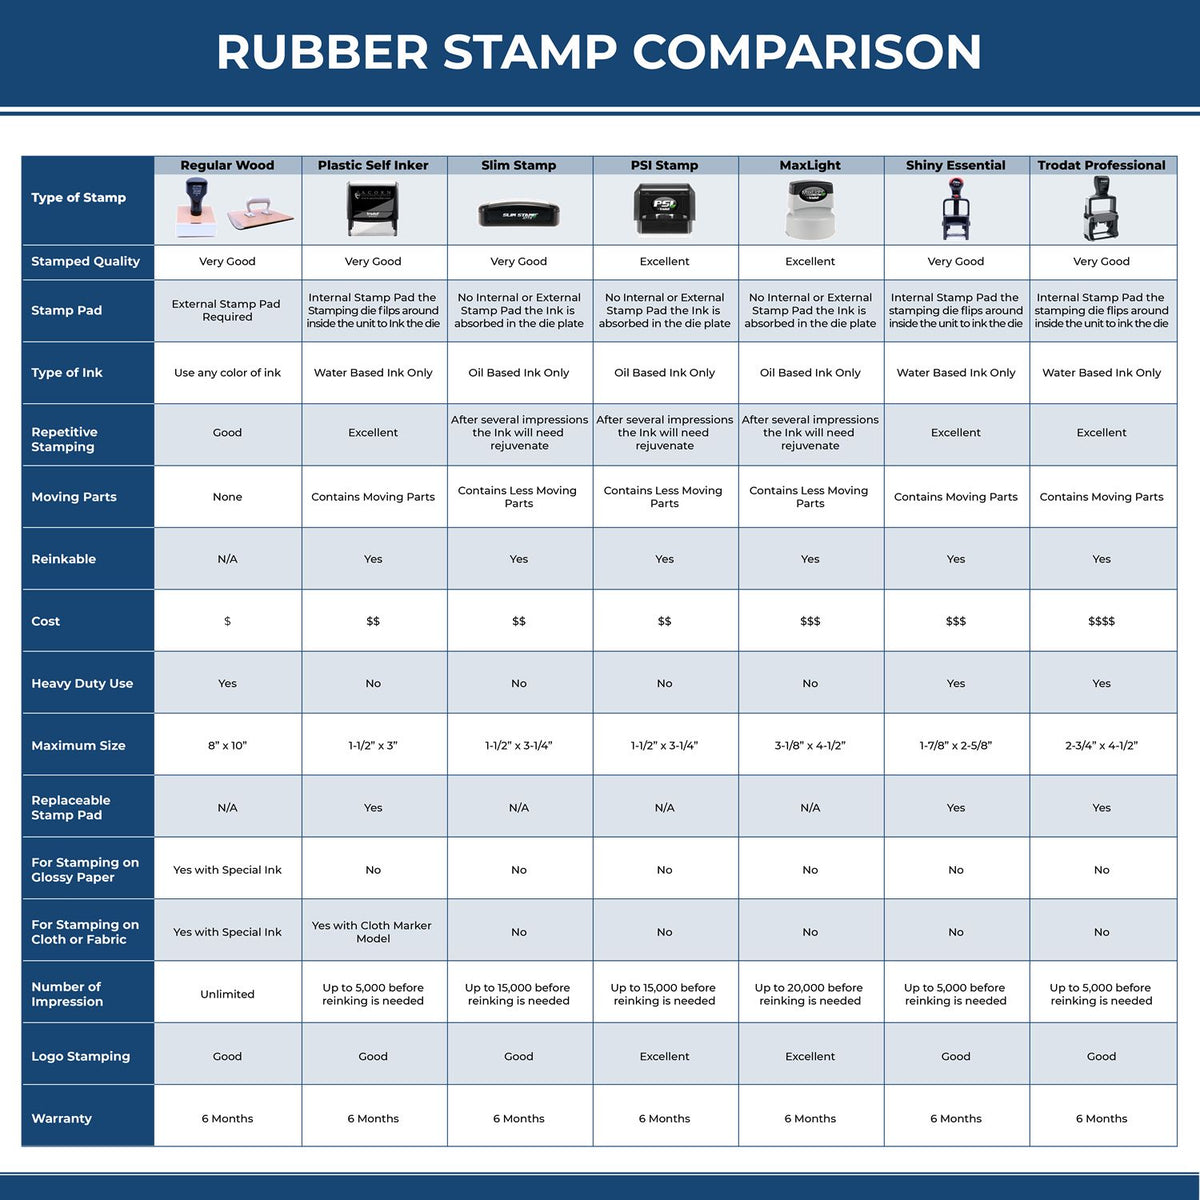 Large Self Inking Good Job Stamp 4664S Rubber Stamp Comparison